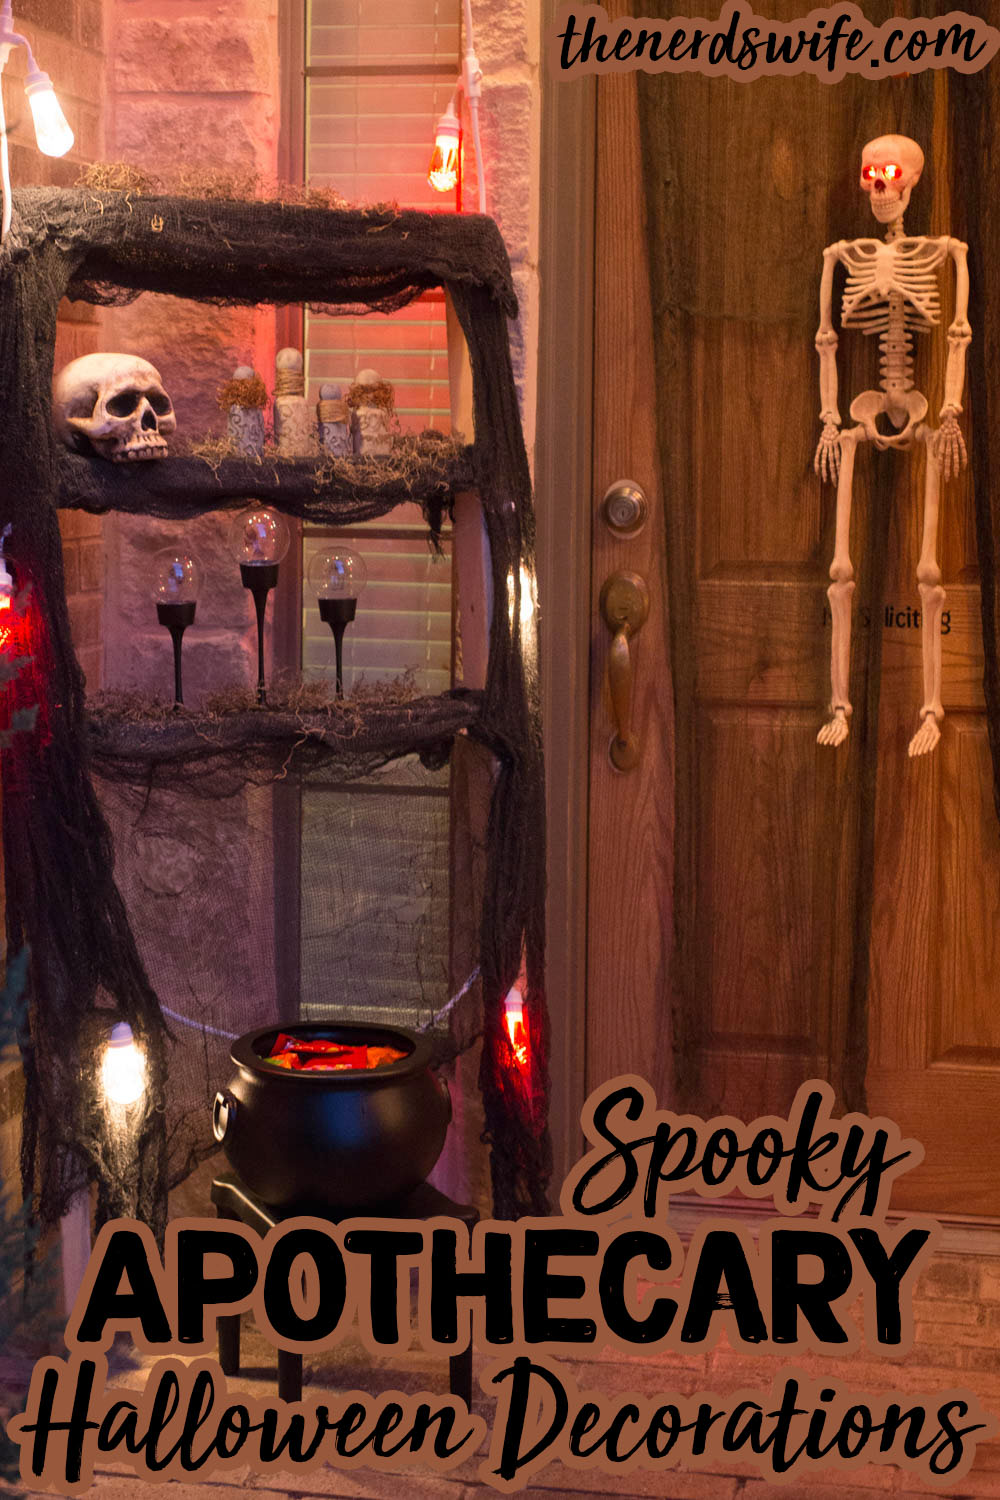 Spooky Apothecary Halloween Decorations - The Nerd's Wife